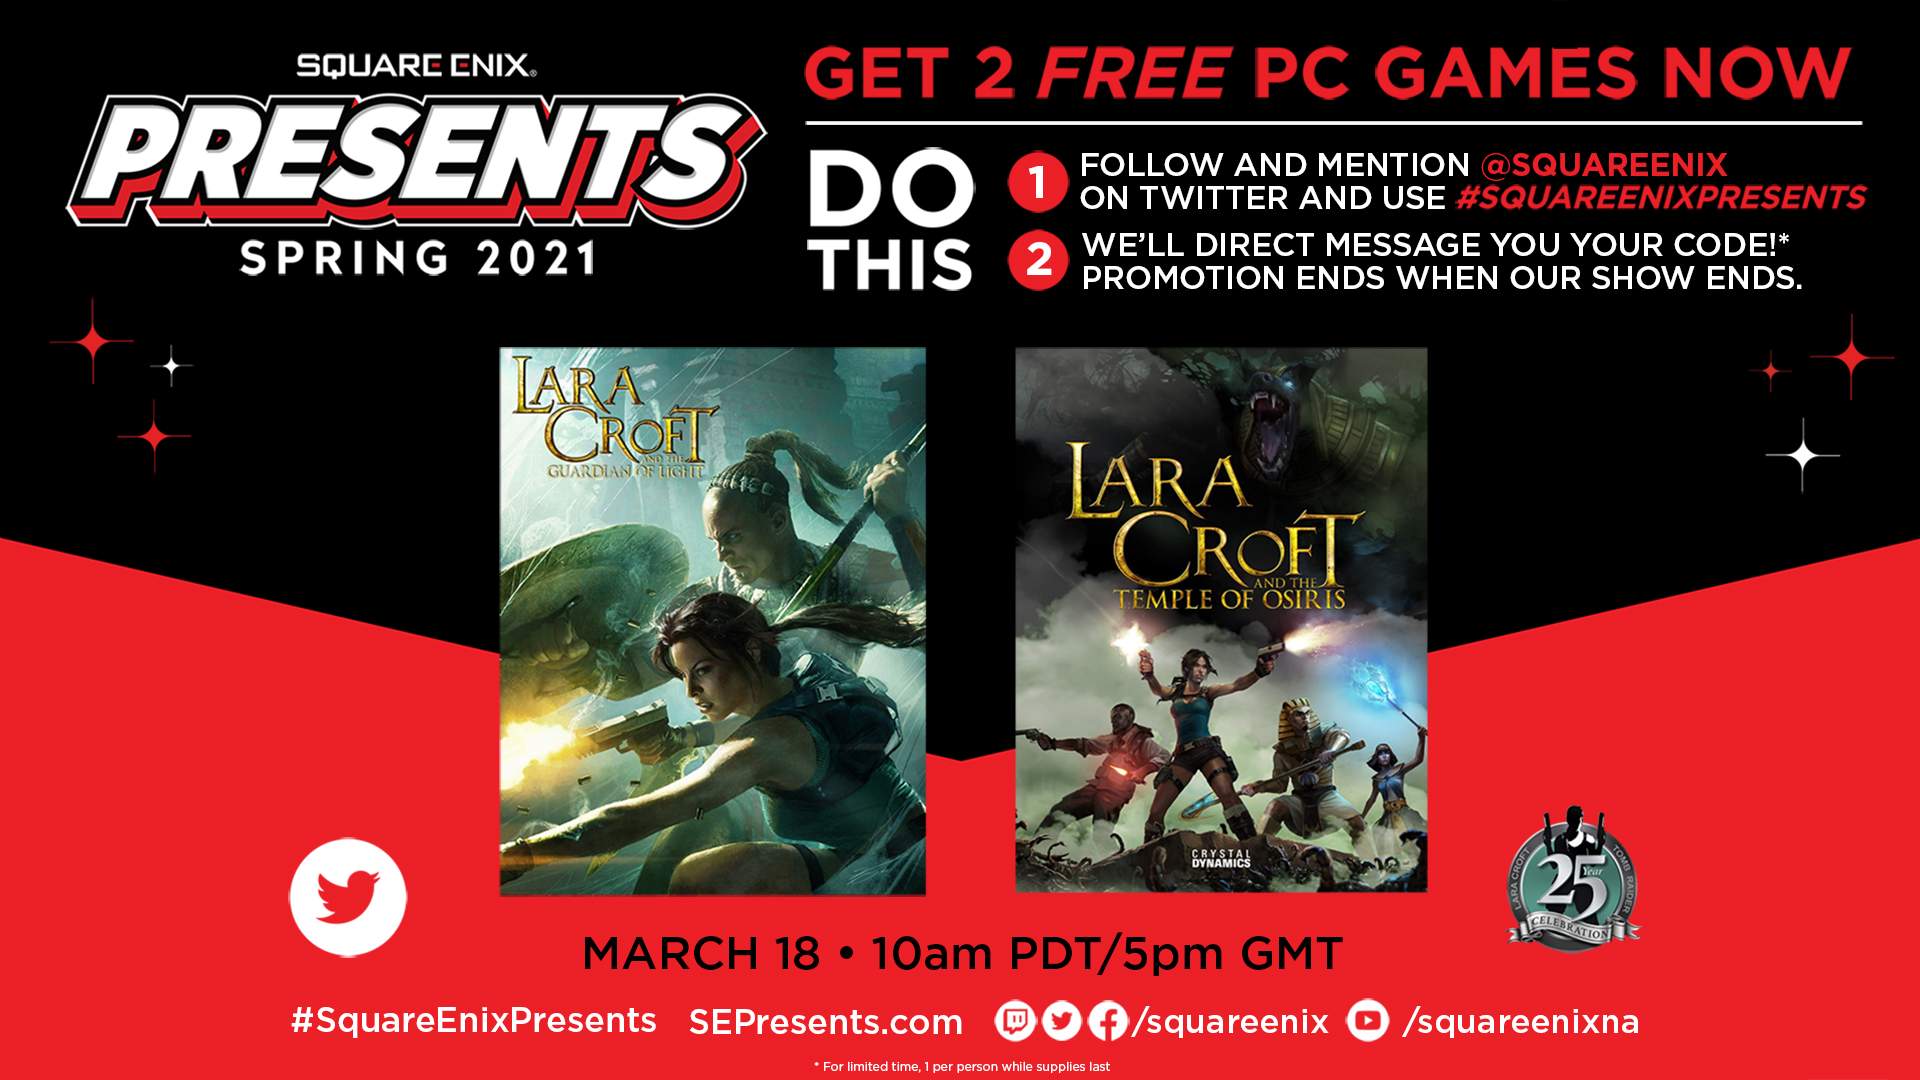 Square Enix Presents Get 2 Free PC Games Now